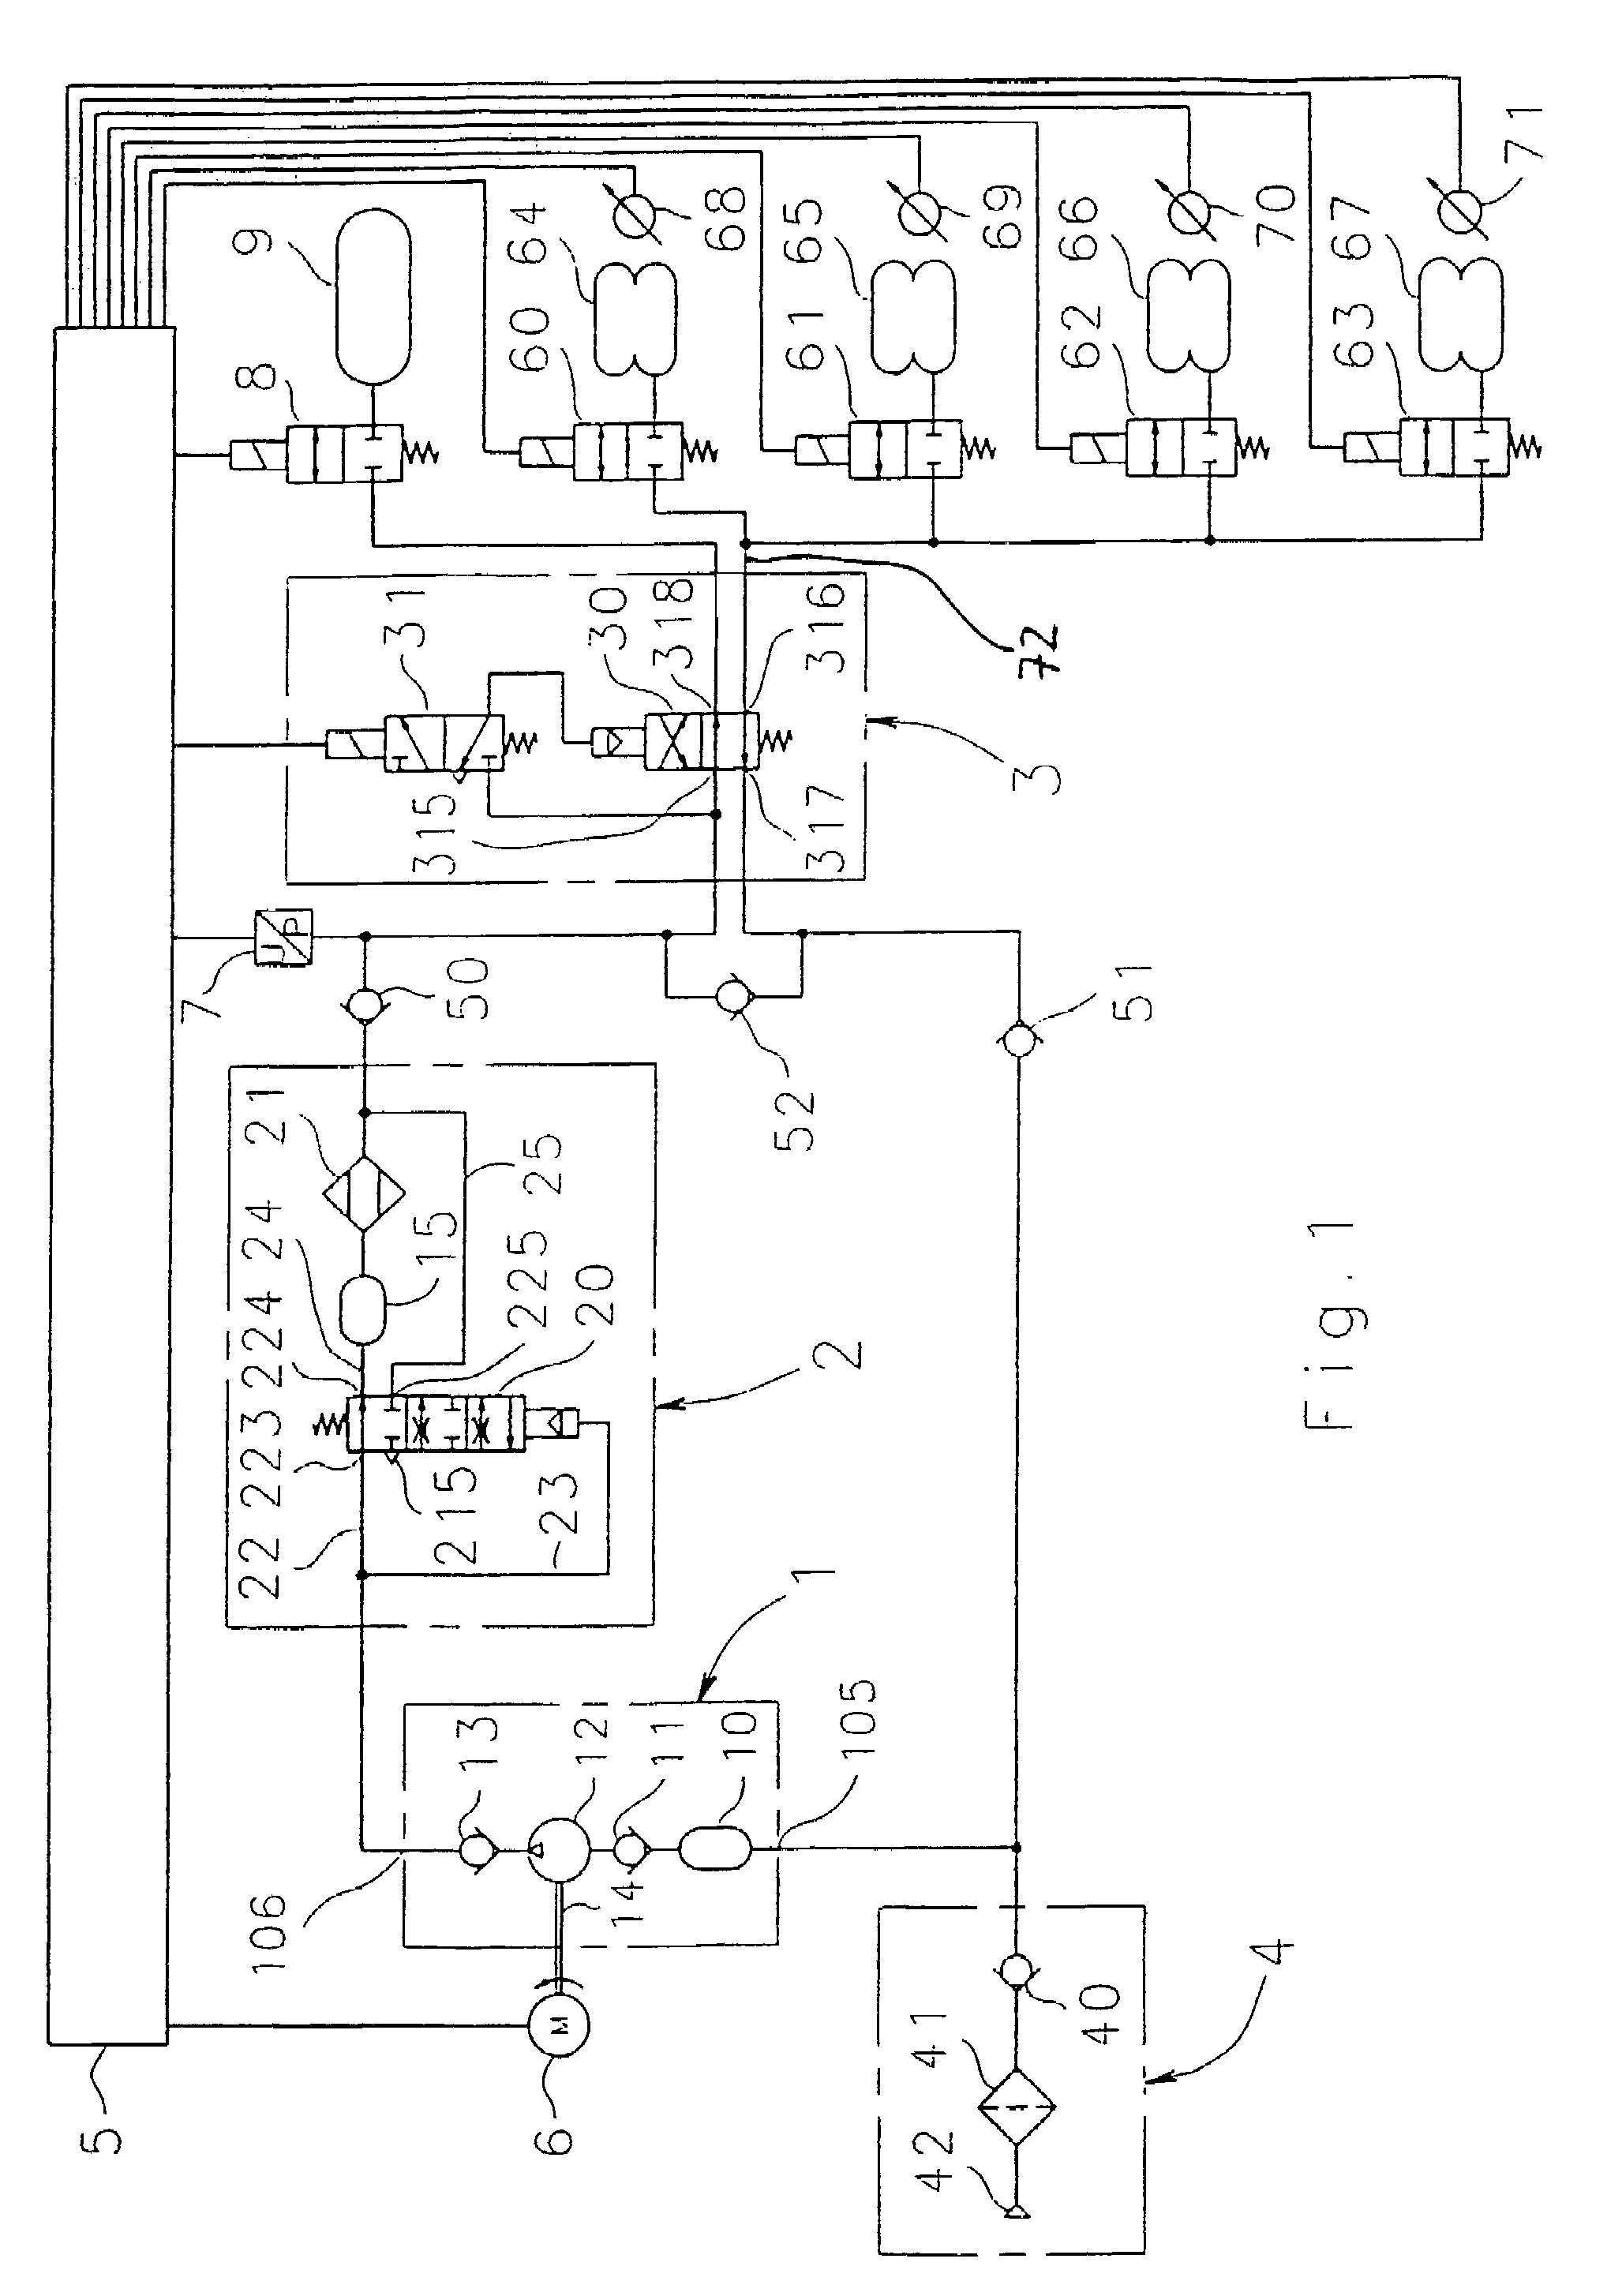 Pneumatic suspension system for a vehicle